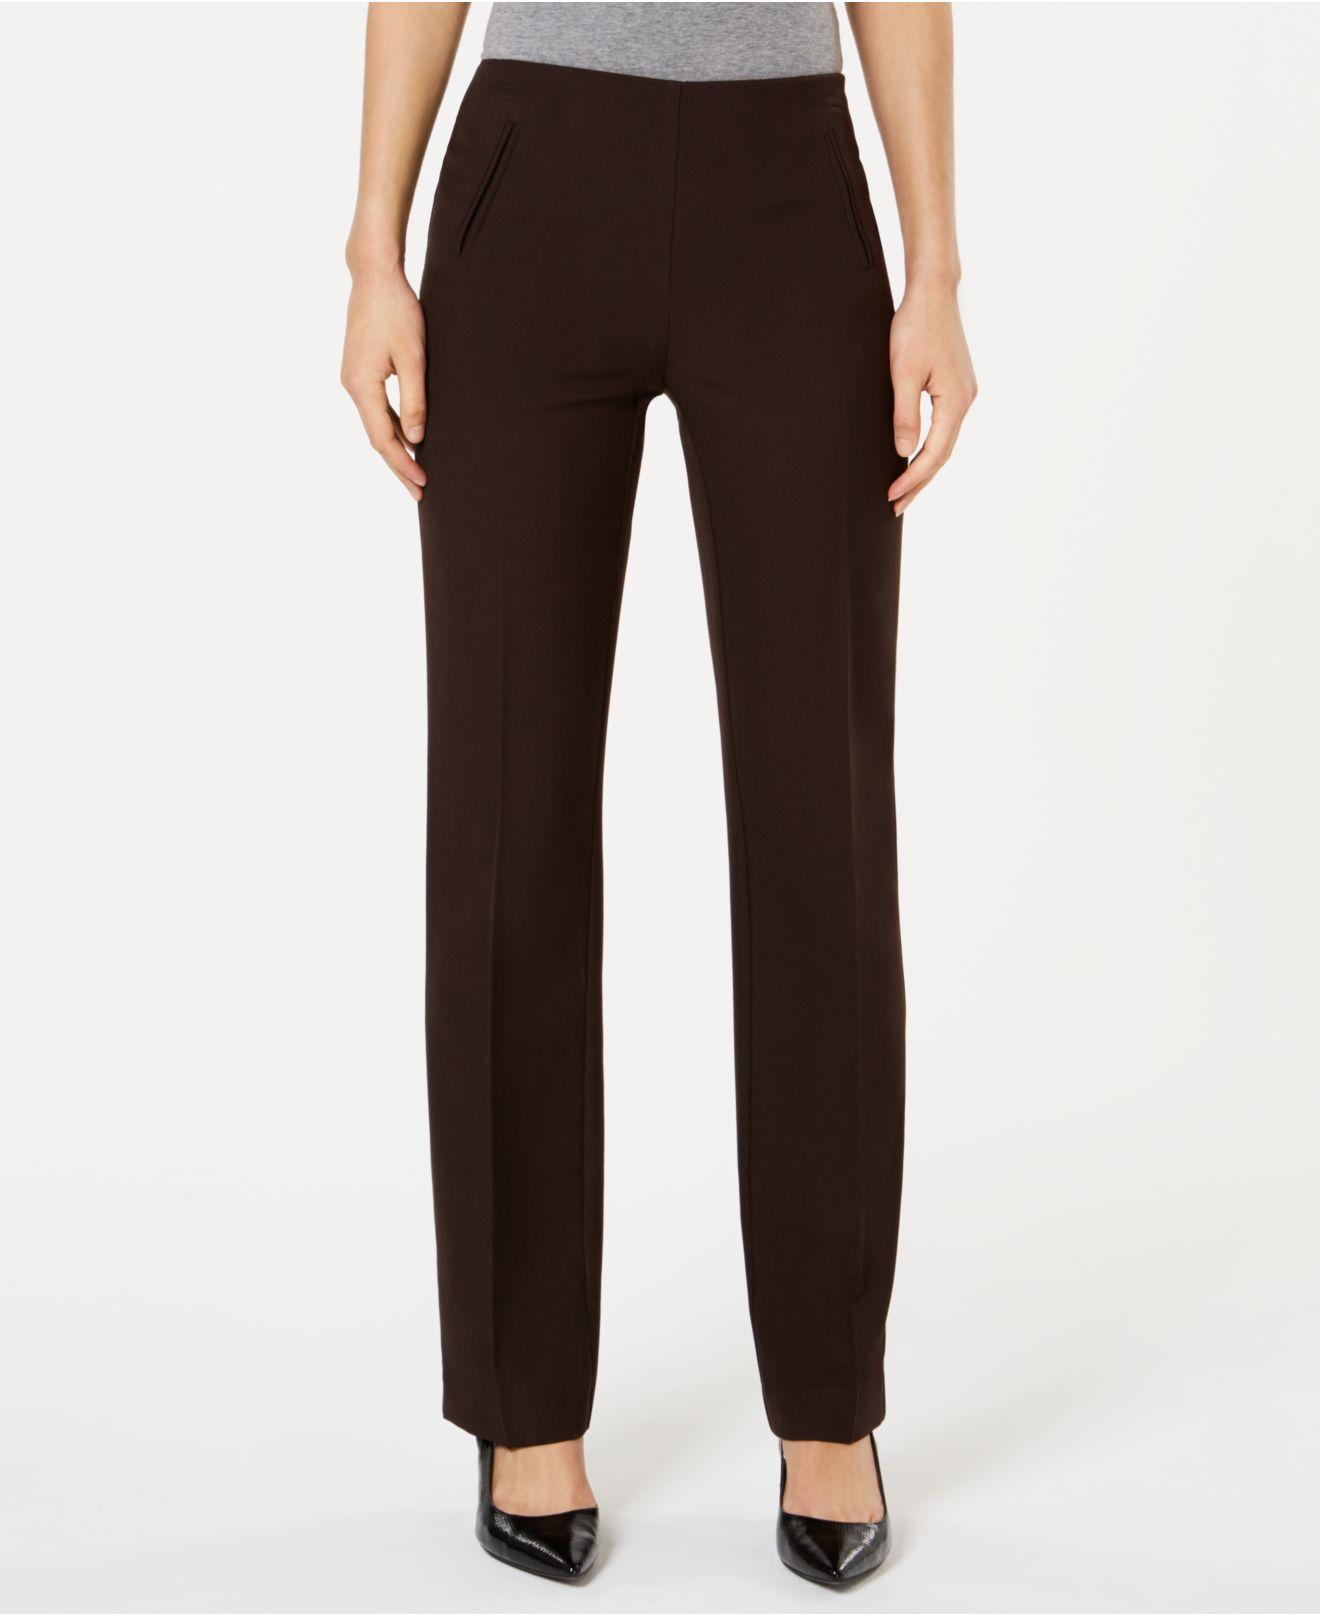 Lyst - Style & Co. Pull-on Tummy-control Pants, Created For Macy's in Brown